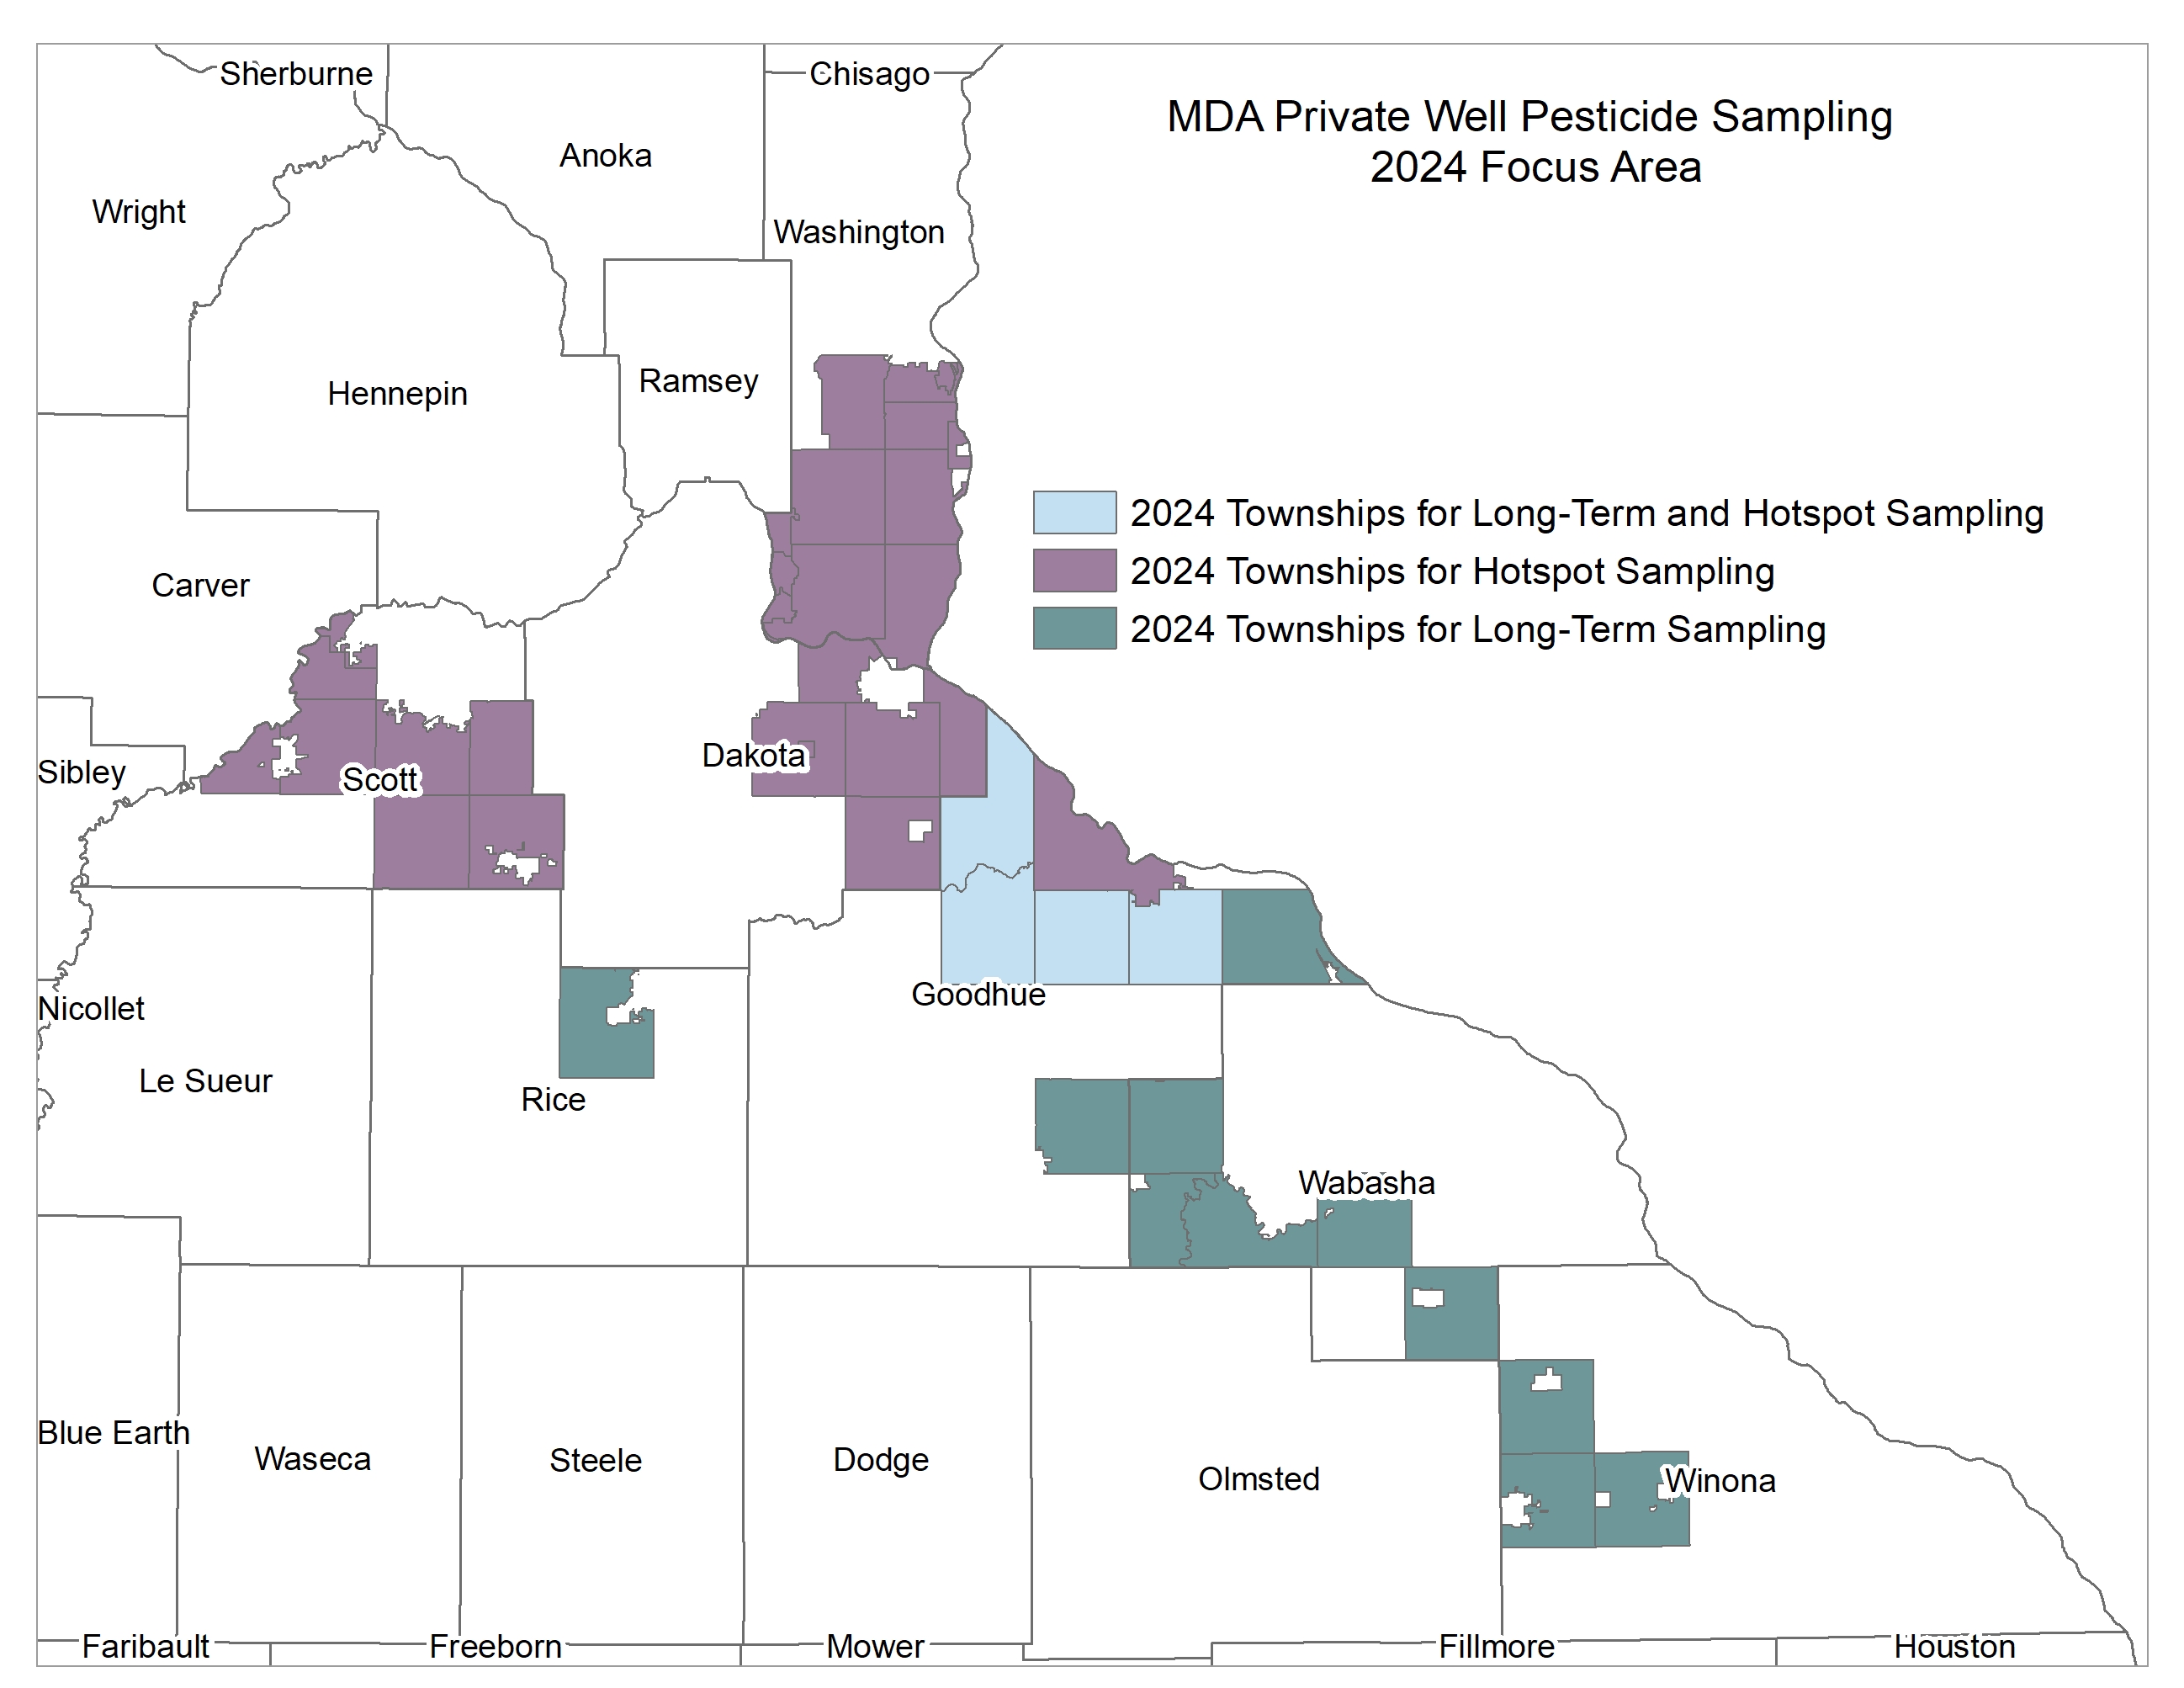 Map of the townships included in the 2024 focus area for long-term and/or hotspot sampling. Select townships are located in Scott, Dakota, Washington, Rice, Goodhue, Wabasha, and Winona counties.